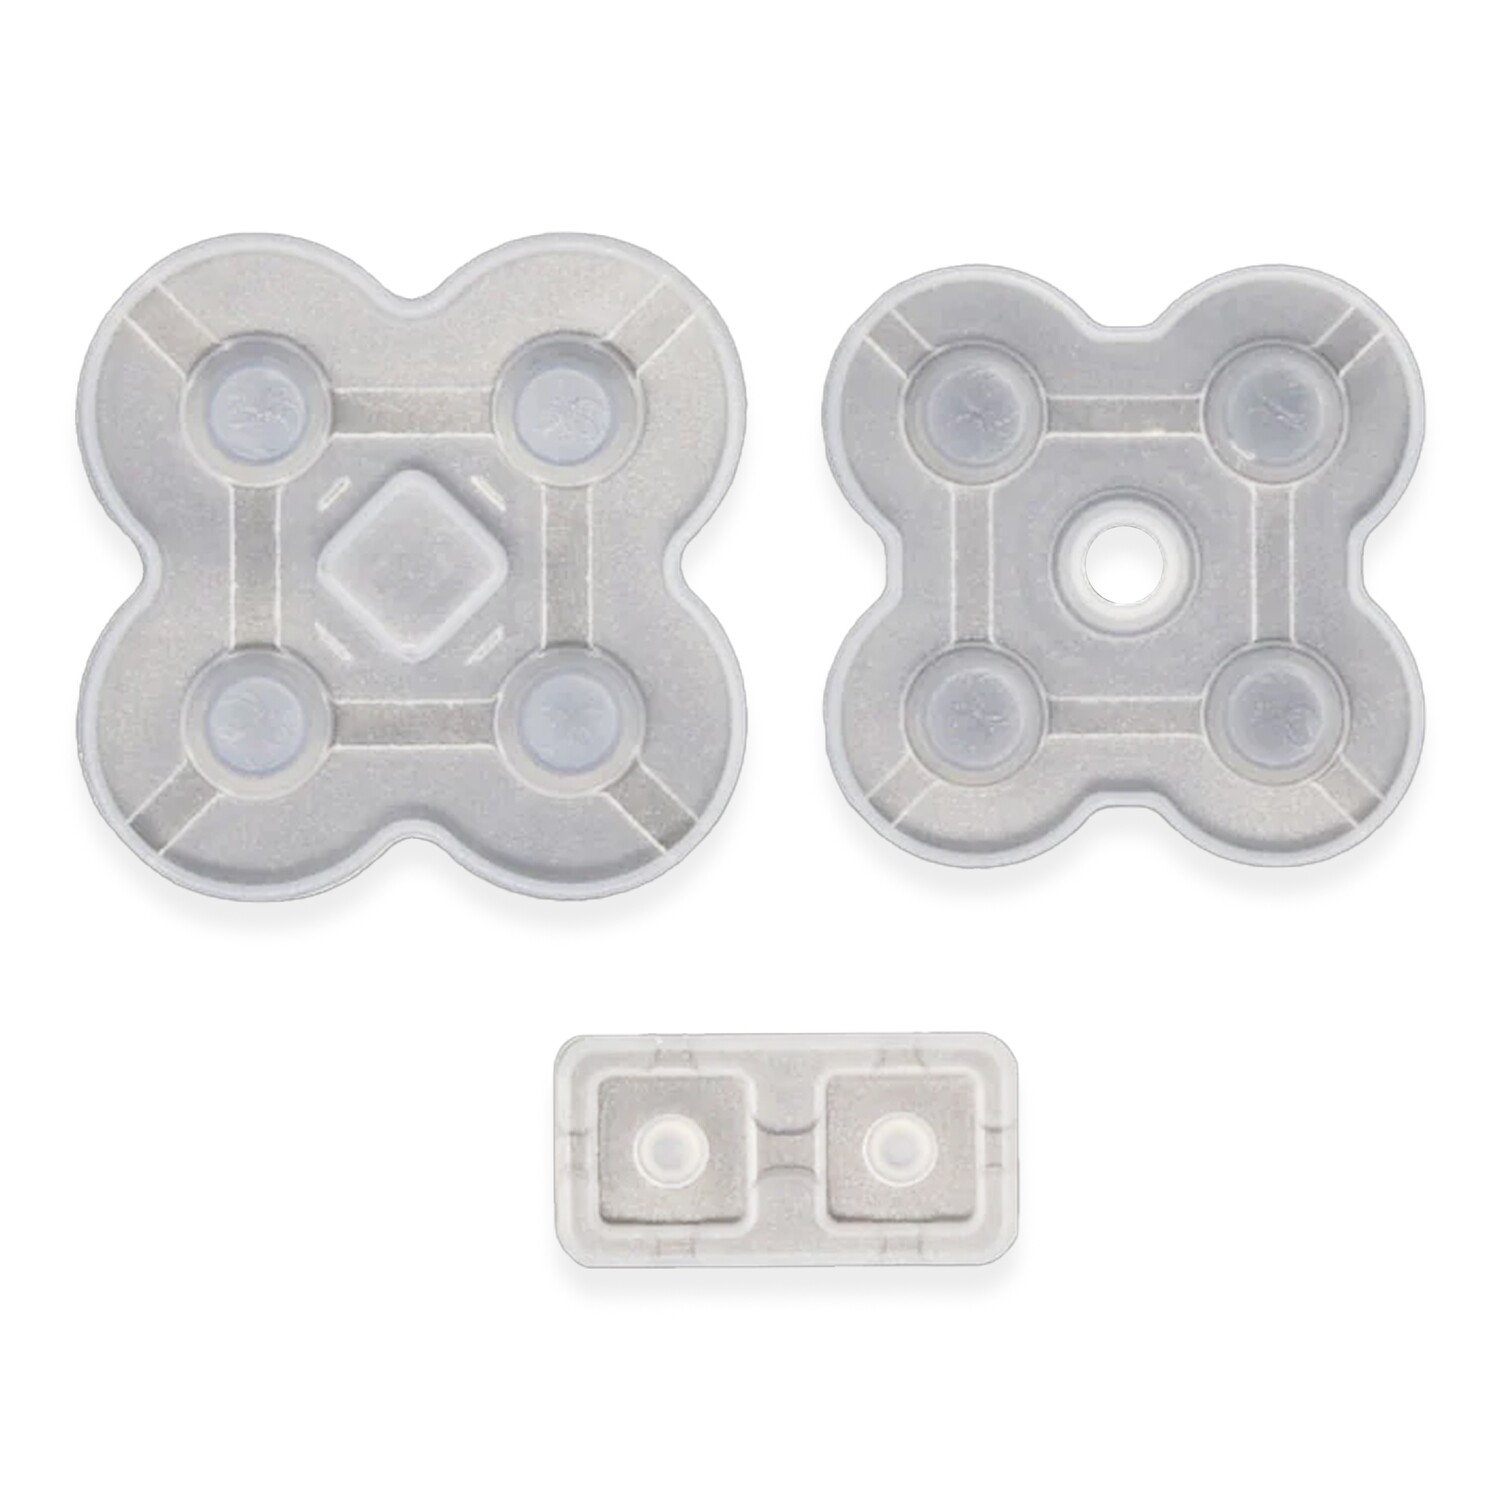 Nintendo DS Lite Rubber Pads (Clear)